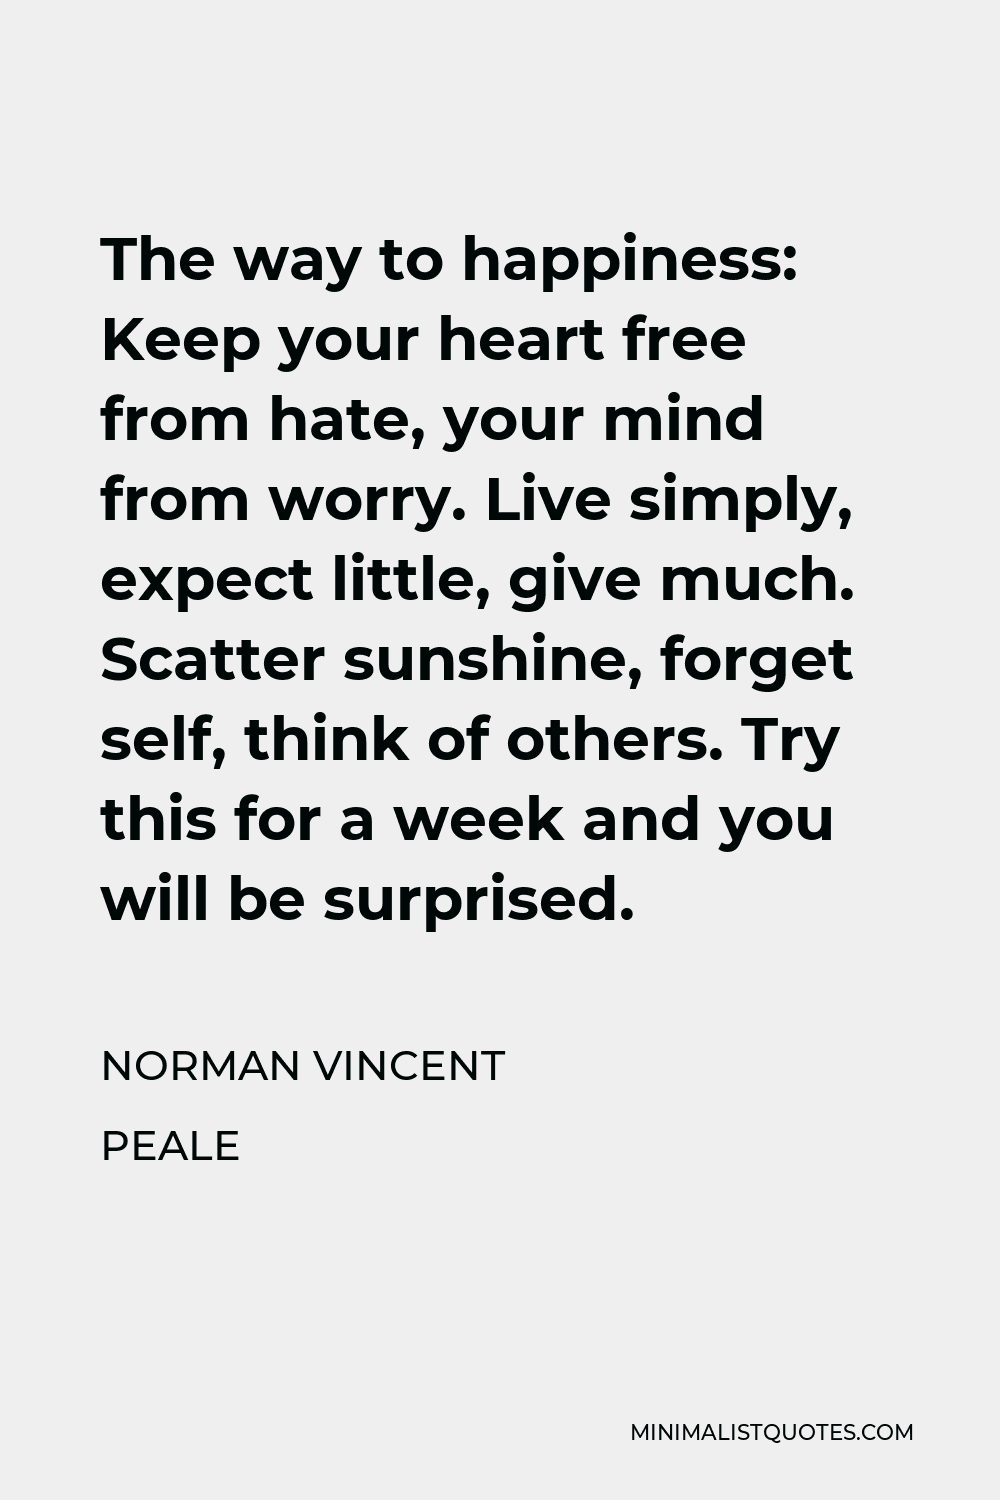 Norman Vincent Peale Quote - The way to happiness: Keep your heart free from hate, your mind from worry. Live simply, expect little, give much. Scatter sunshine, forget self, think of others. Try this for a week and you will be surprised.